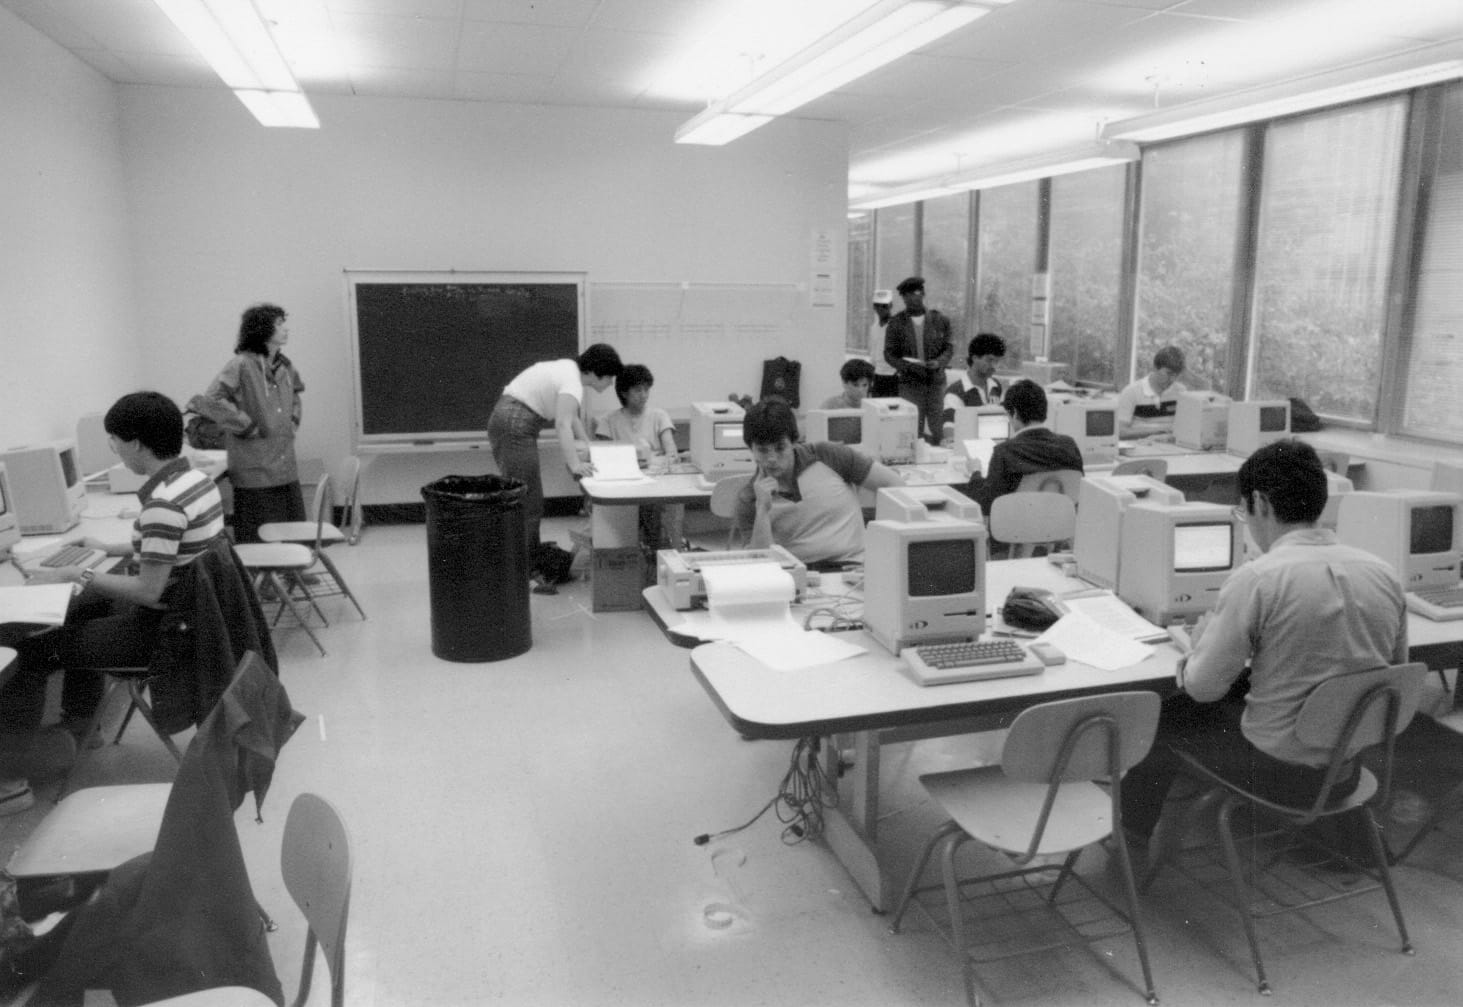 A room full of Drexel Macintoshes for students to use. Photo courtesy Drexel University Archives.